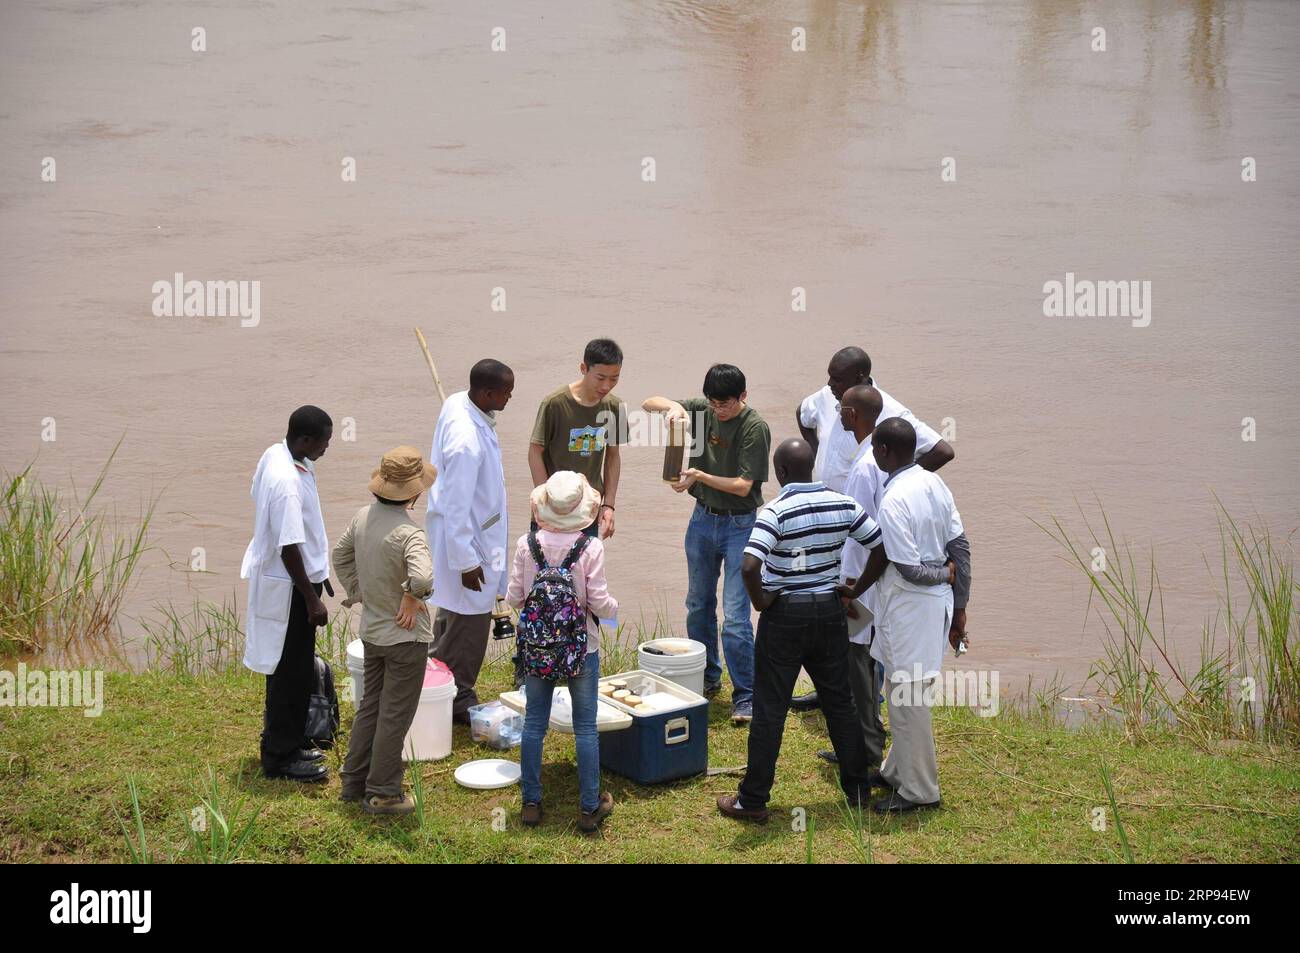 (190323) -- BEIJING, March 23, 2019 (Xinhua) -- Researchers from Nanjing Institute of Geography and Limnology of Chinese Academy of Sciences and experts from African institutions collect sample of water from a river in a reserve in Tanzania, March 3, 2014. The Sino-Africa Joint Research Center (SAJOREC), a talent cultivation and scientific research institute, was established in 2013 and covers some 40 acres of land. The Chinese Academy of Sciences has equipped SAJOREC to enhance its capacity to implement joint research projects. Since its establishment, 48 joint research projects focusing on b Stock Photo